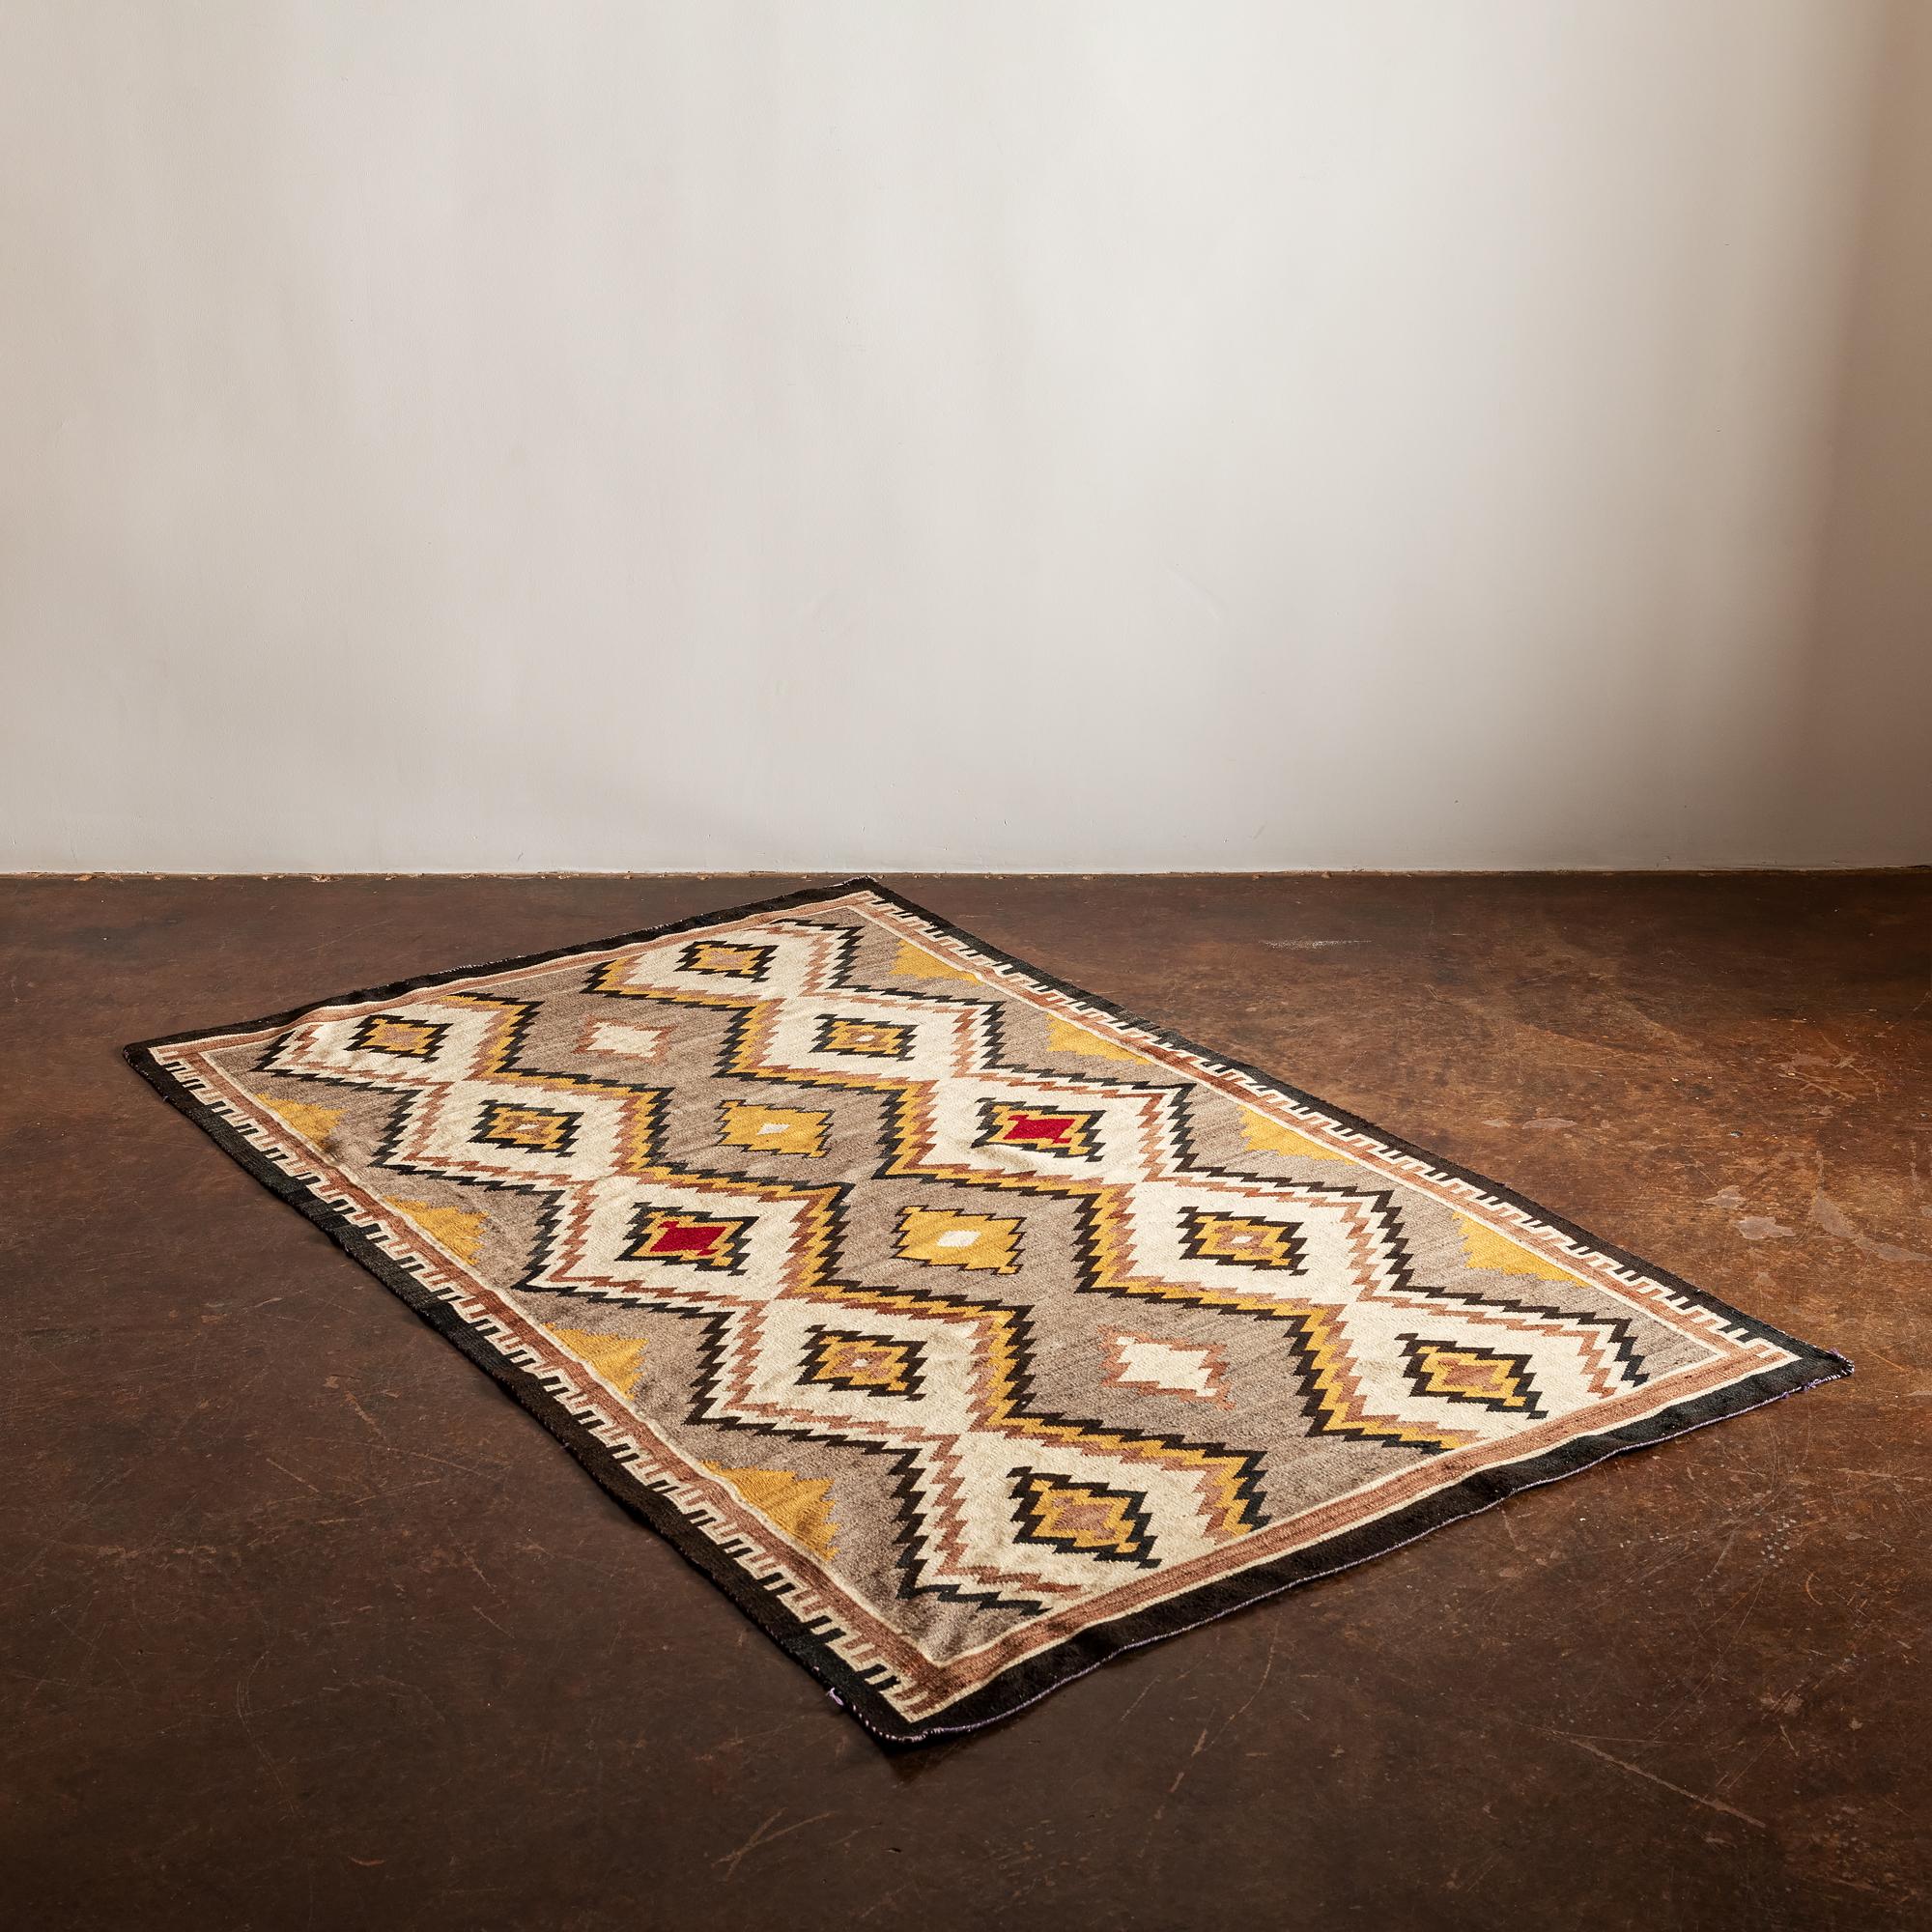 A Classic Navajo eye dazzler textile in ochre, neutrals and a pop of red, 1940s.